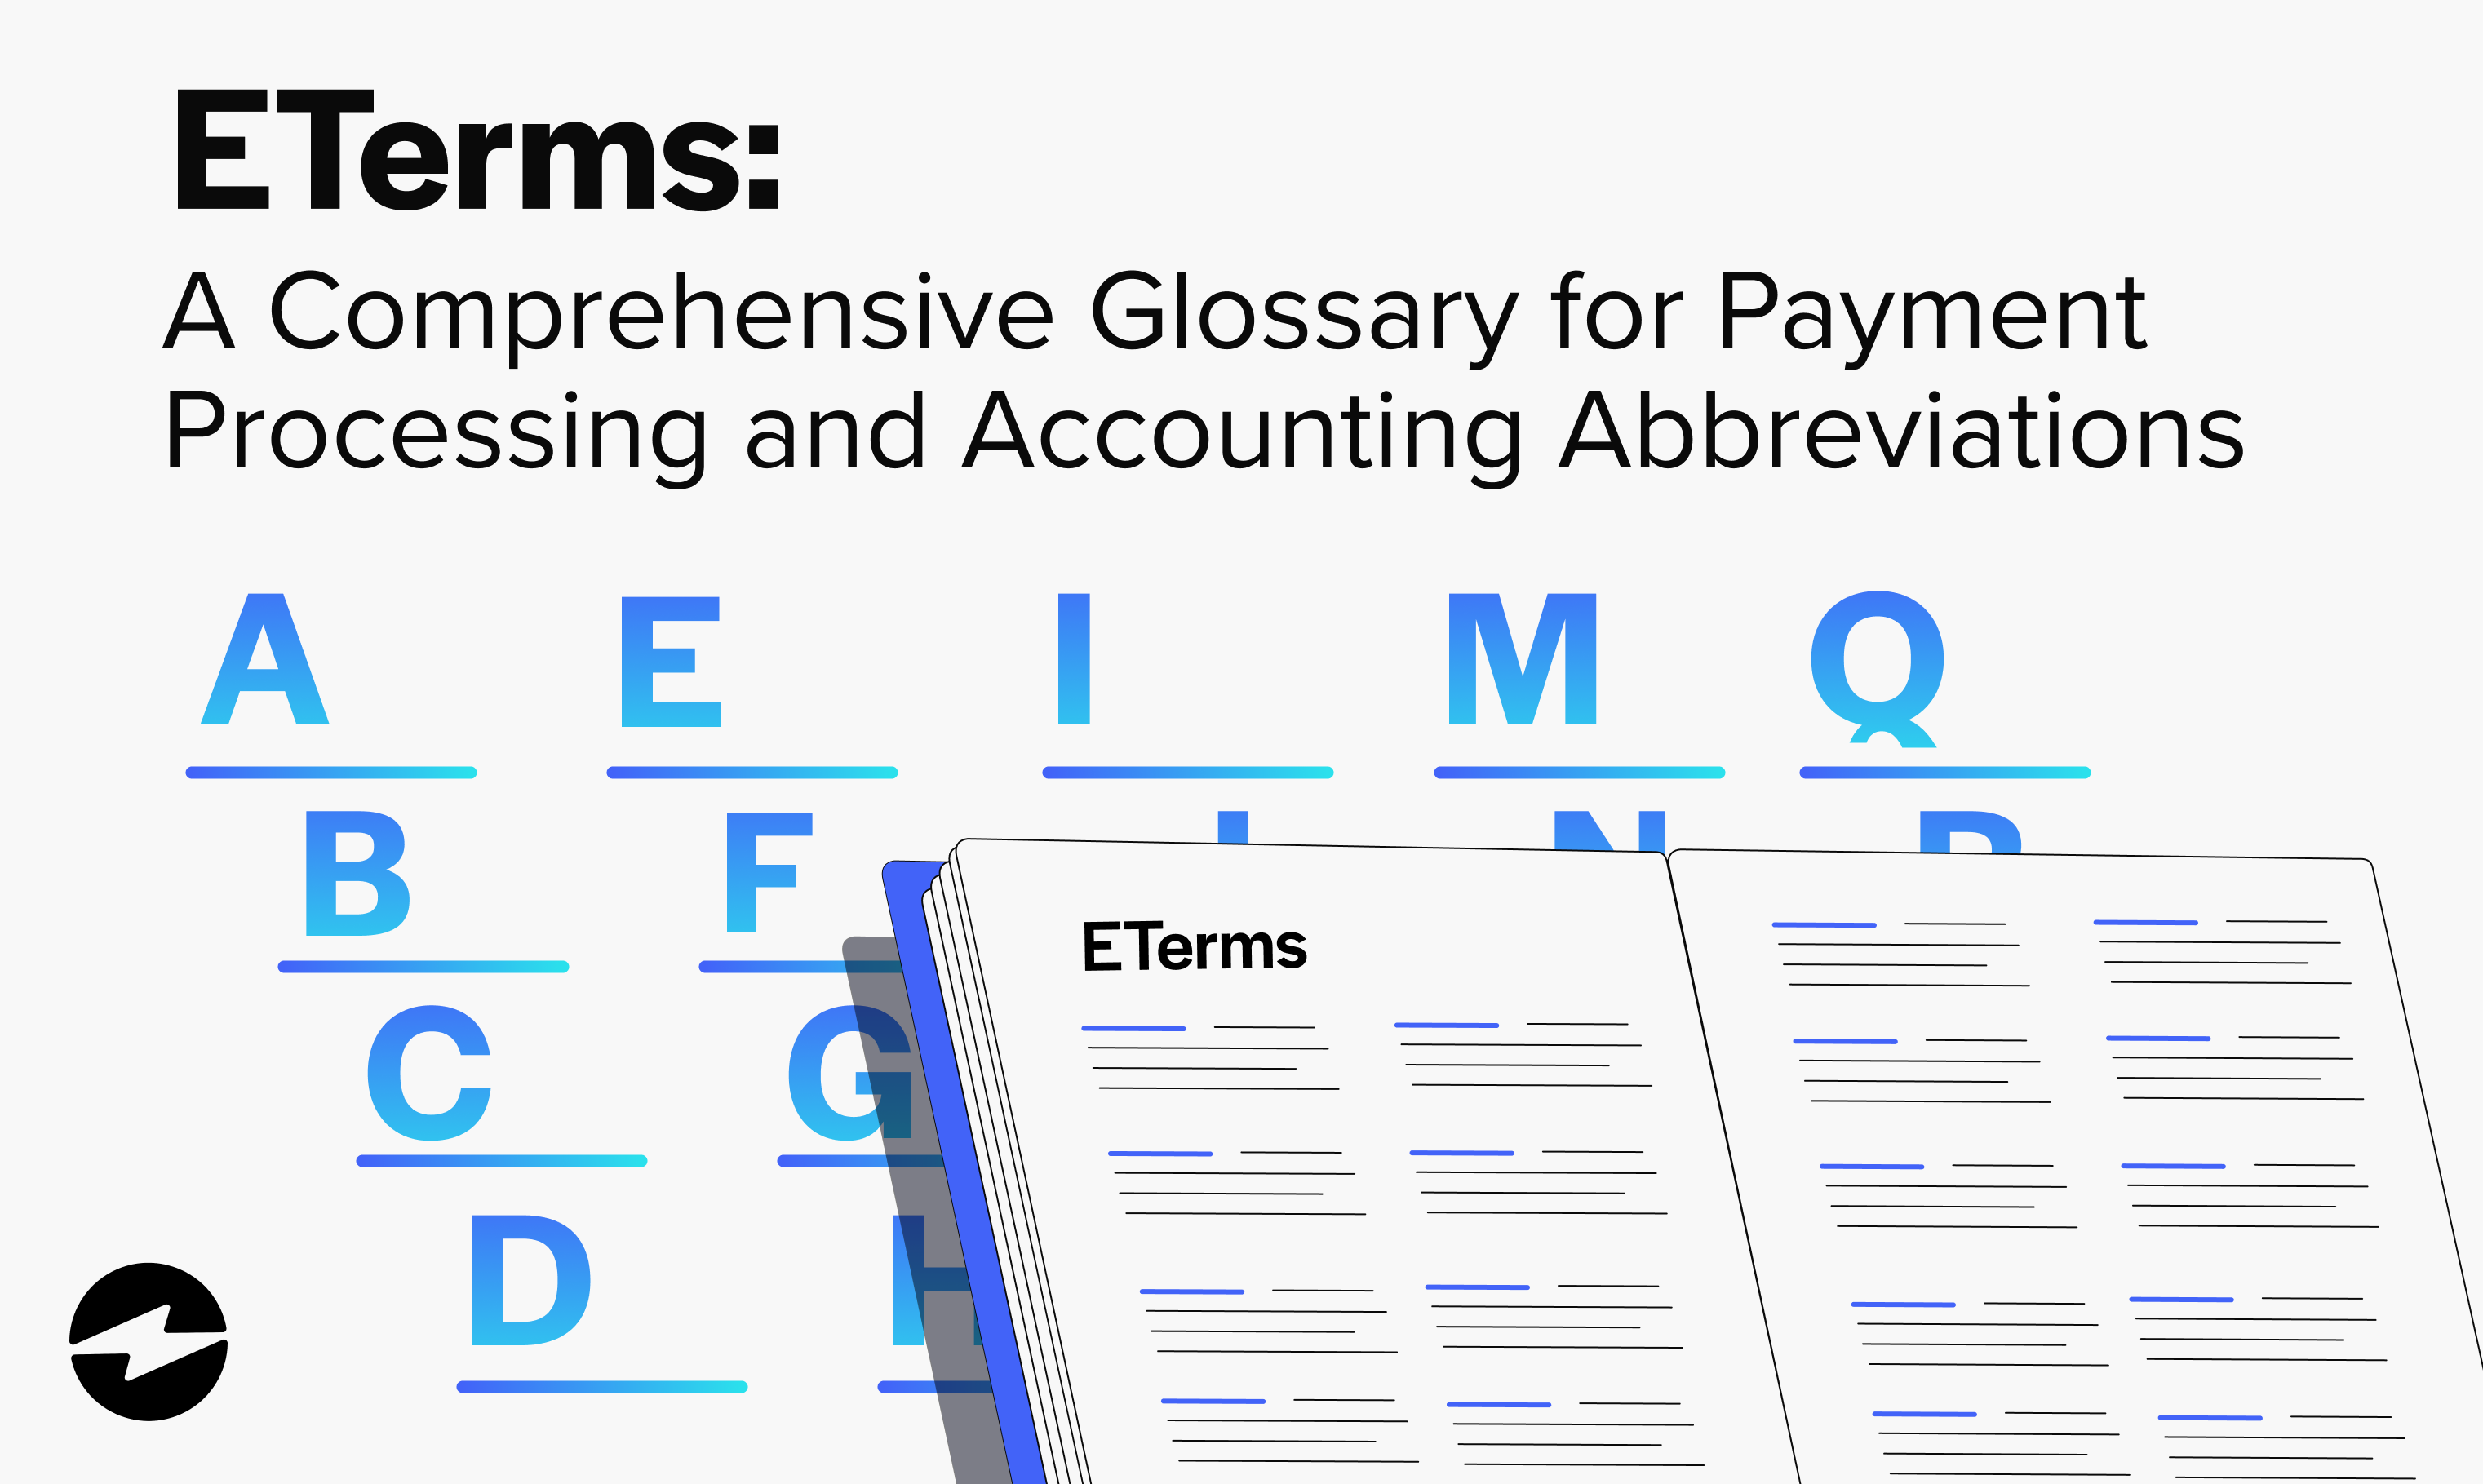 ETerms: A comprehensive glossary for payment processing and accounting abbreviations